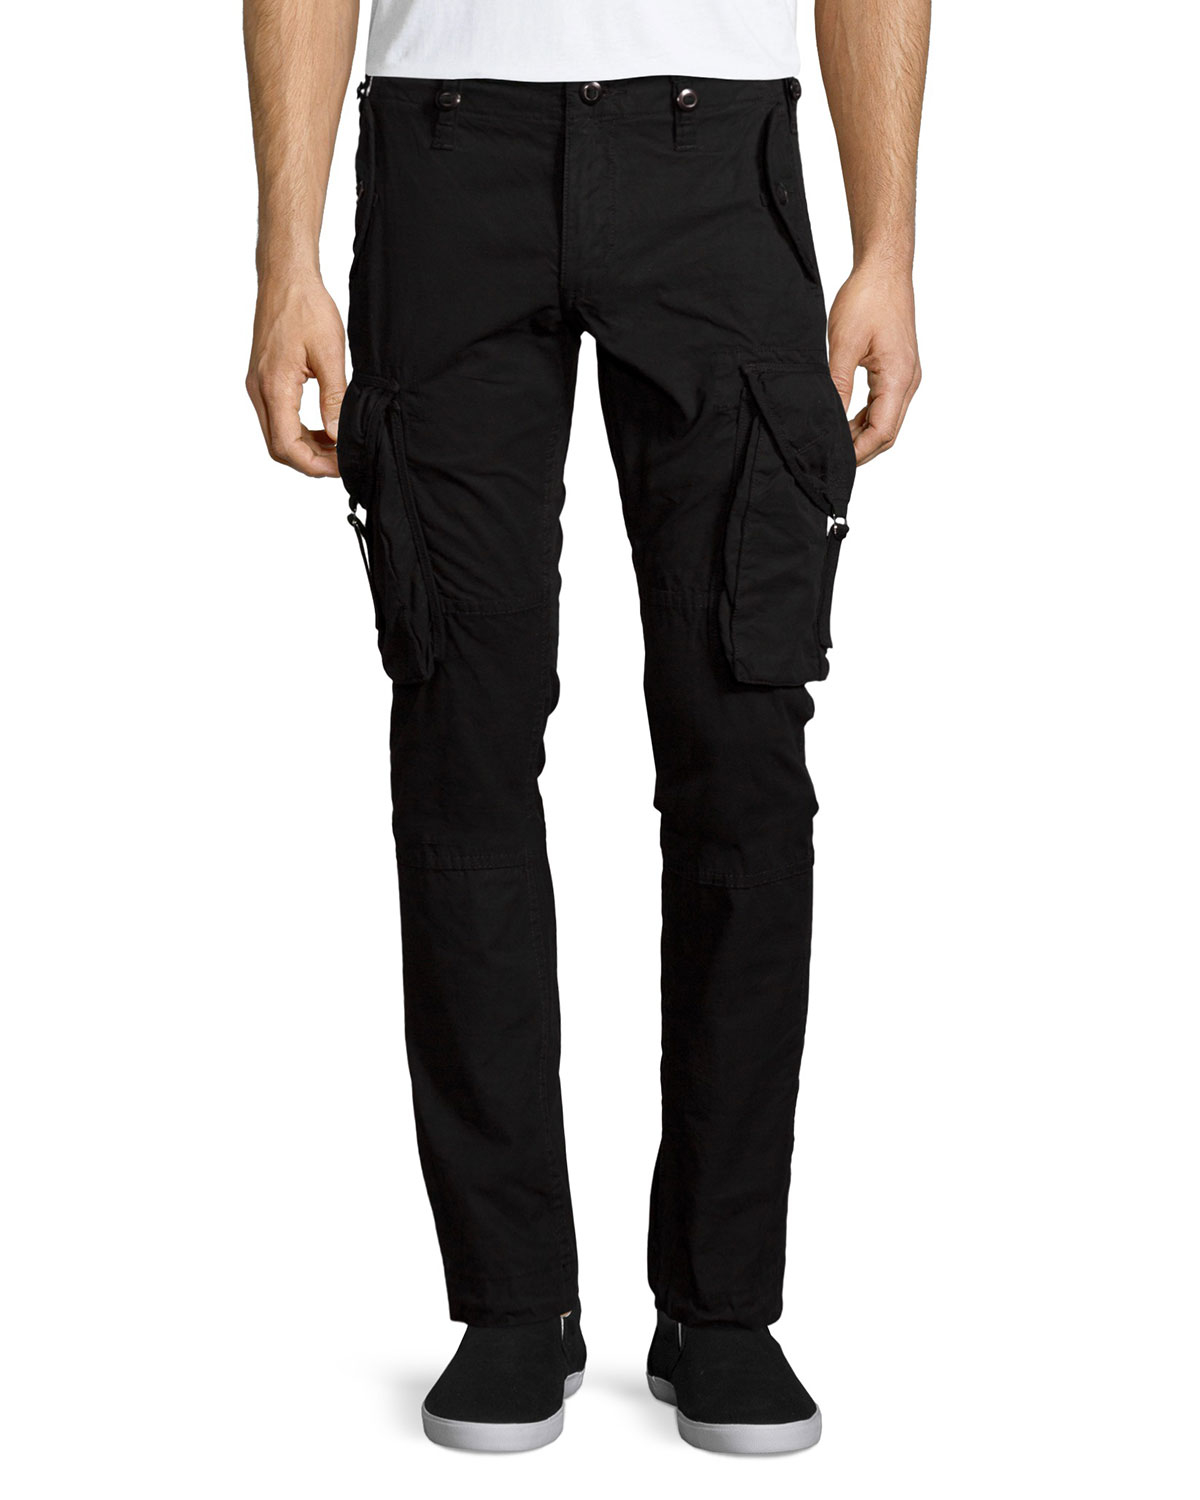 PRPS Cotton Slim-fit Twill Cargo Pants in Black for Men - Lyst